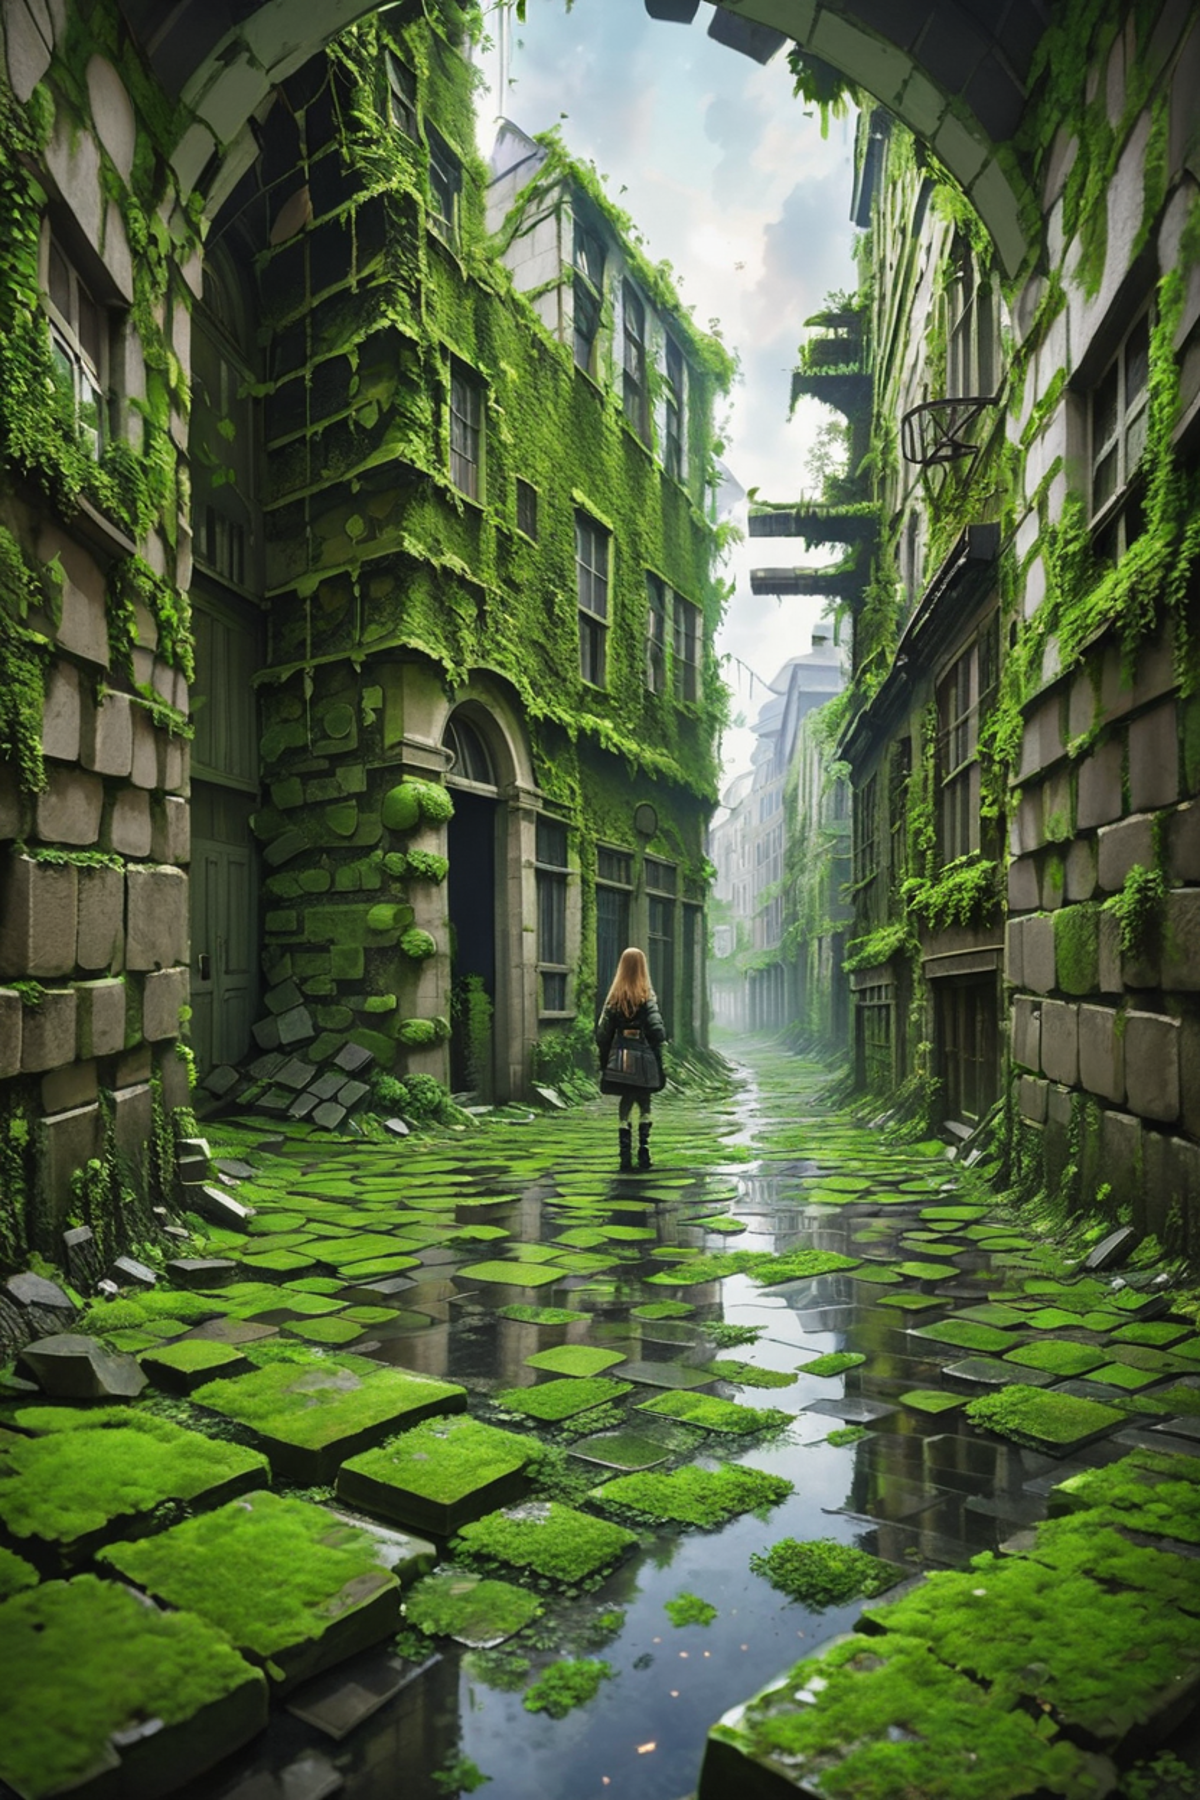 "A woman walking down a green-covered alley with a backpack on"